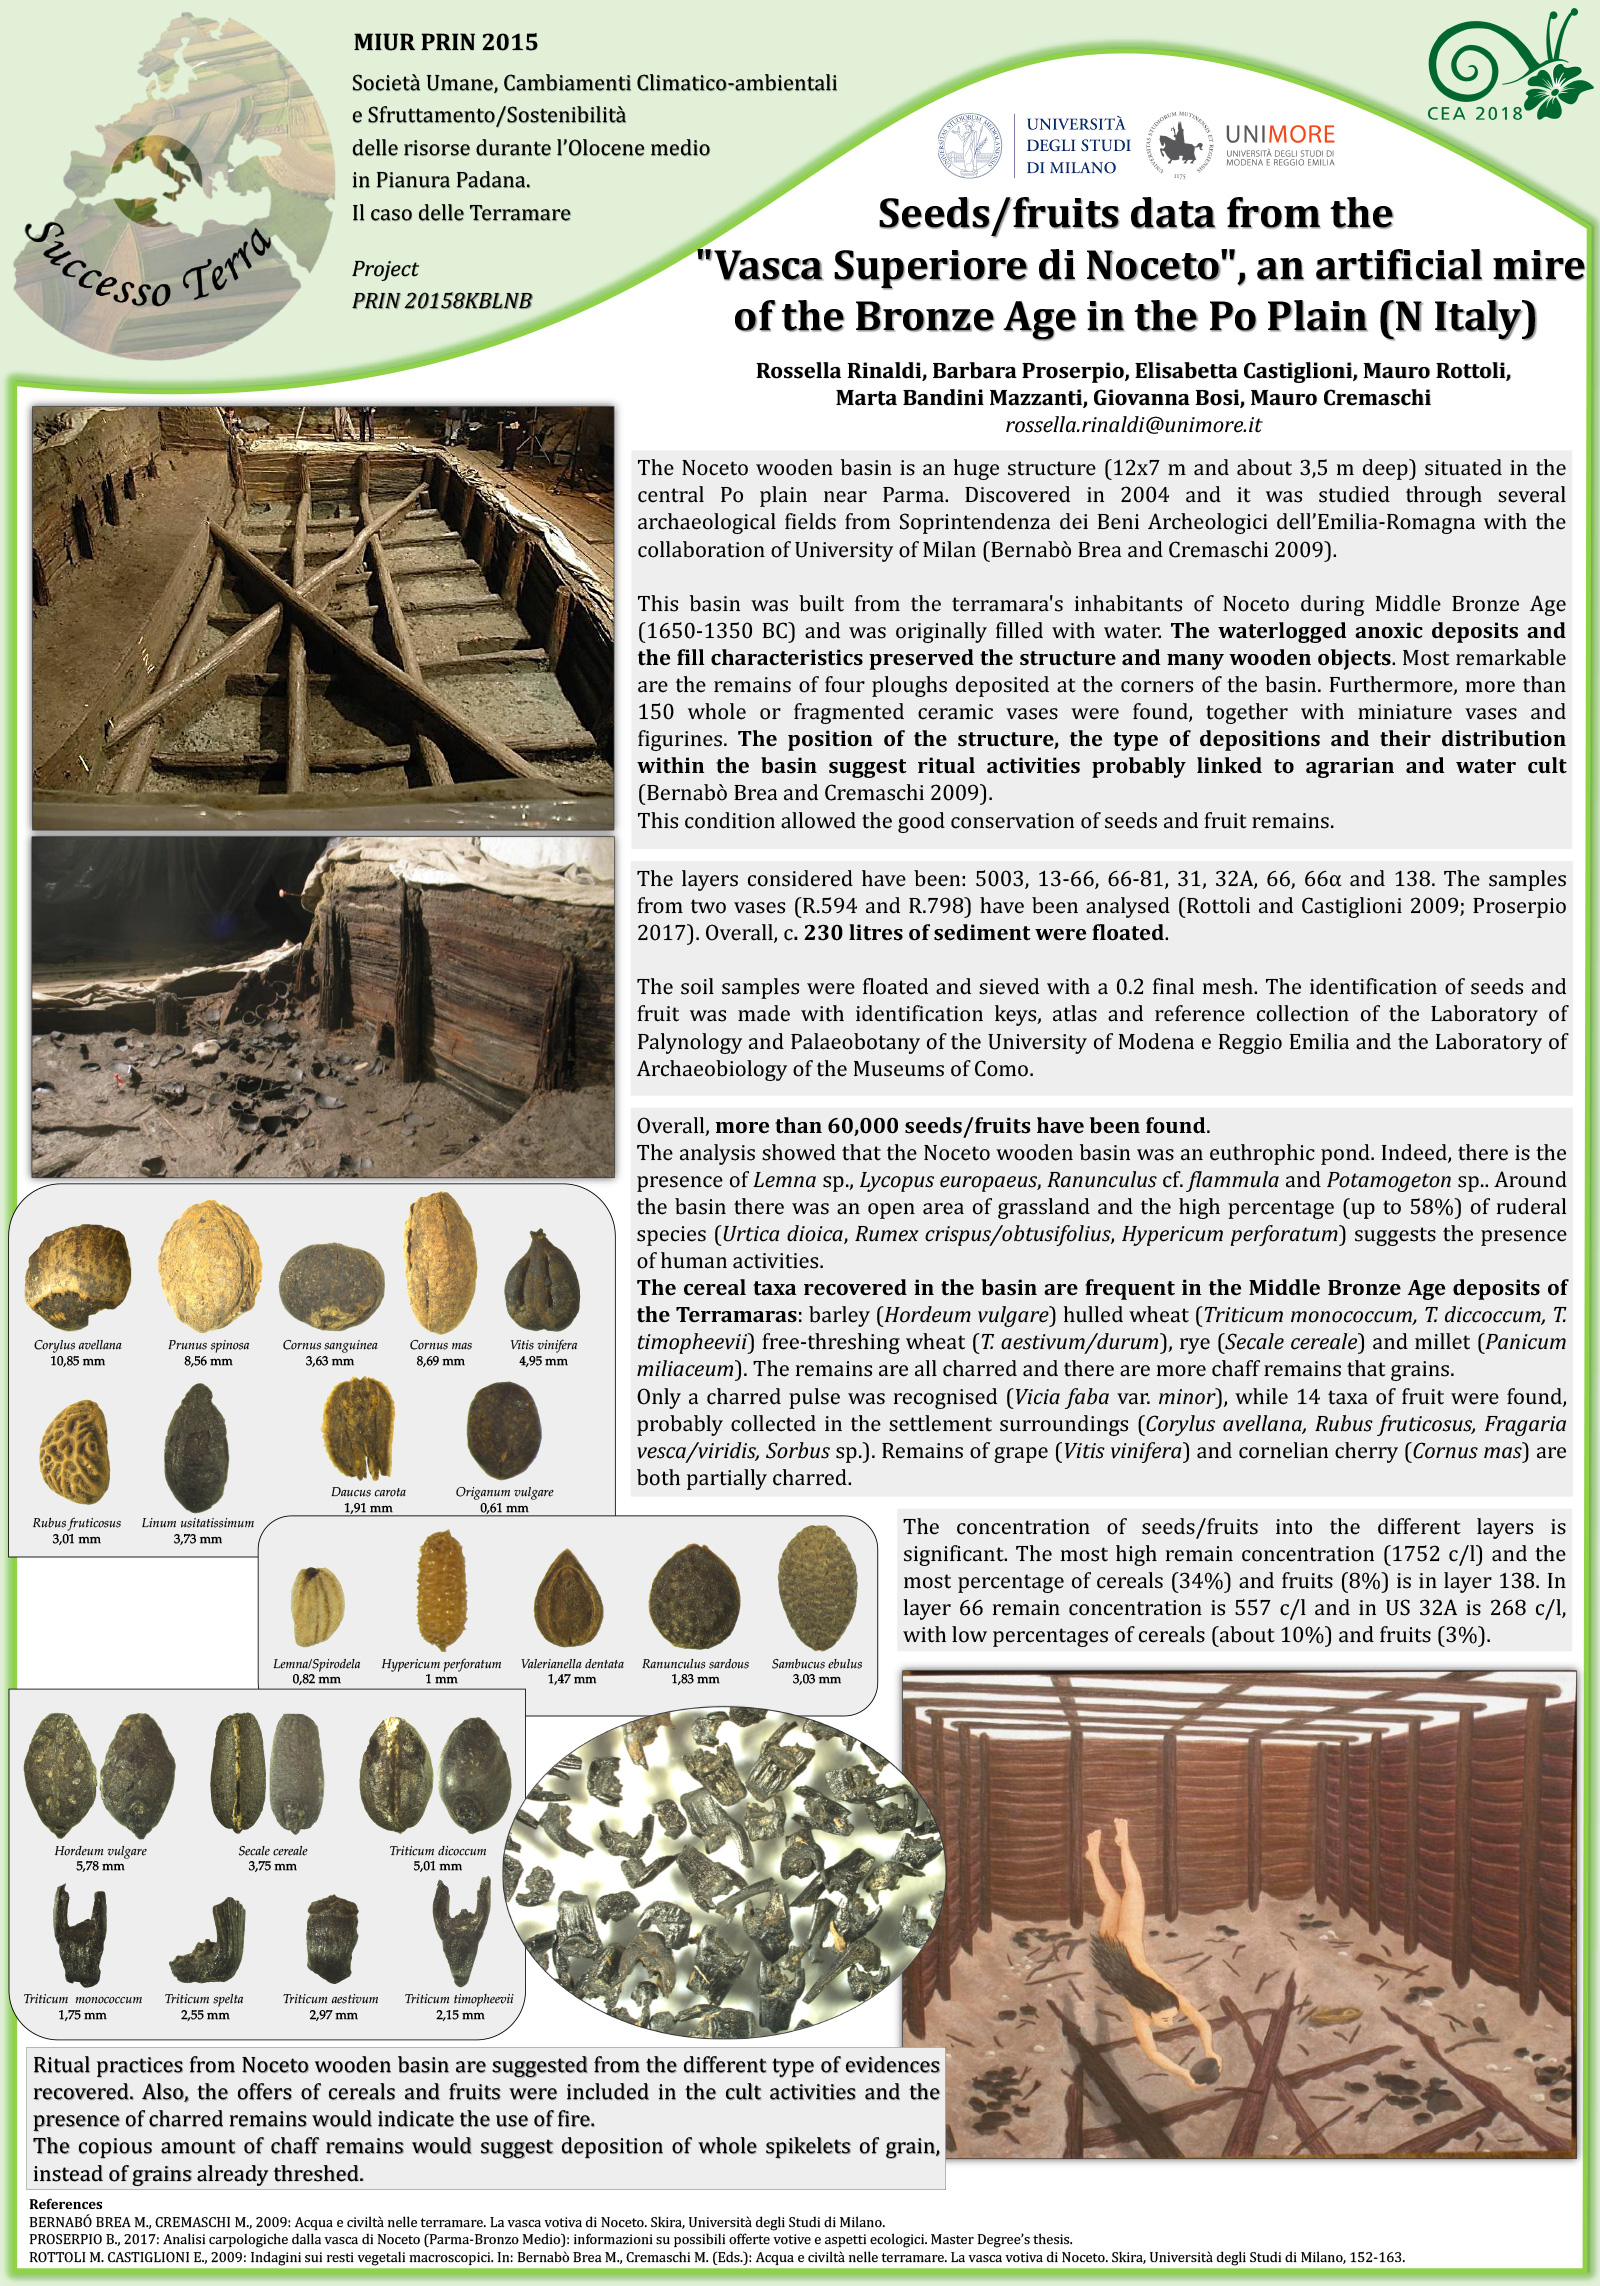 Seeds/fruits data from the ‘Vasca Superiore di Noceto’ an artificial mire of the Bronze Age in the Po Plain (N Italy)